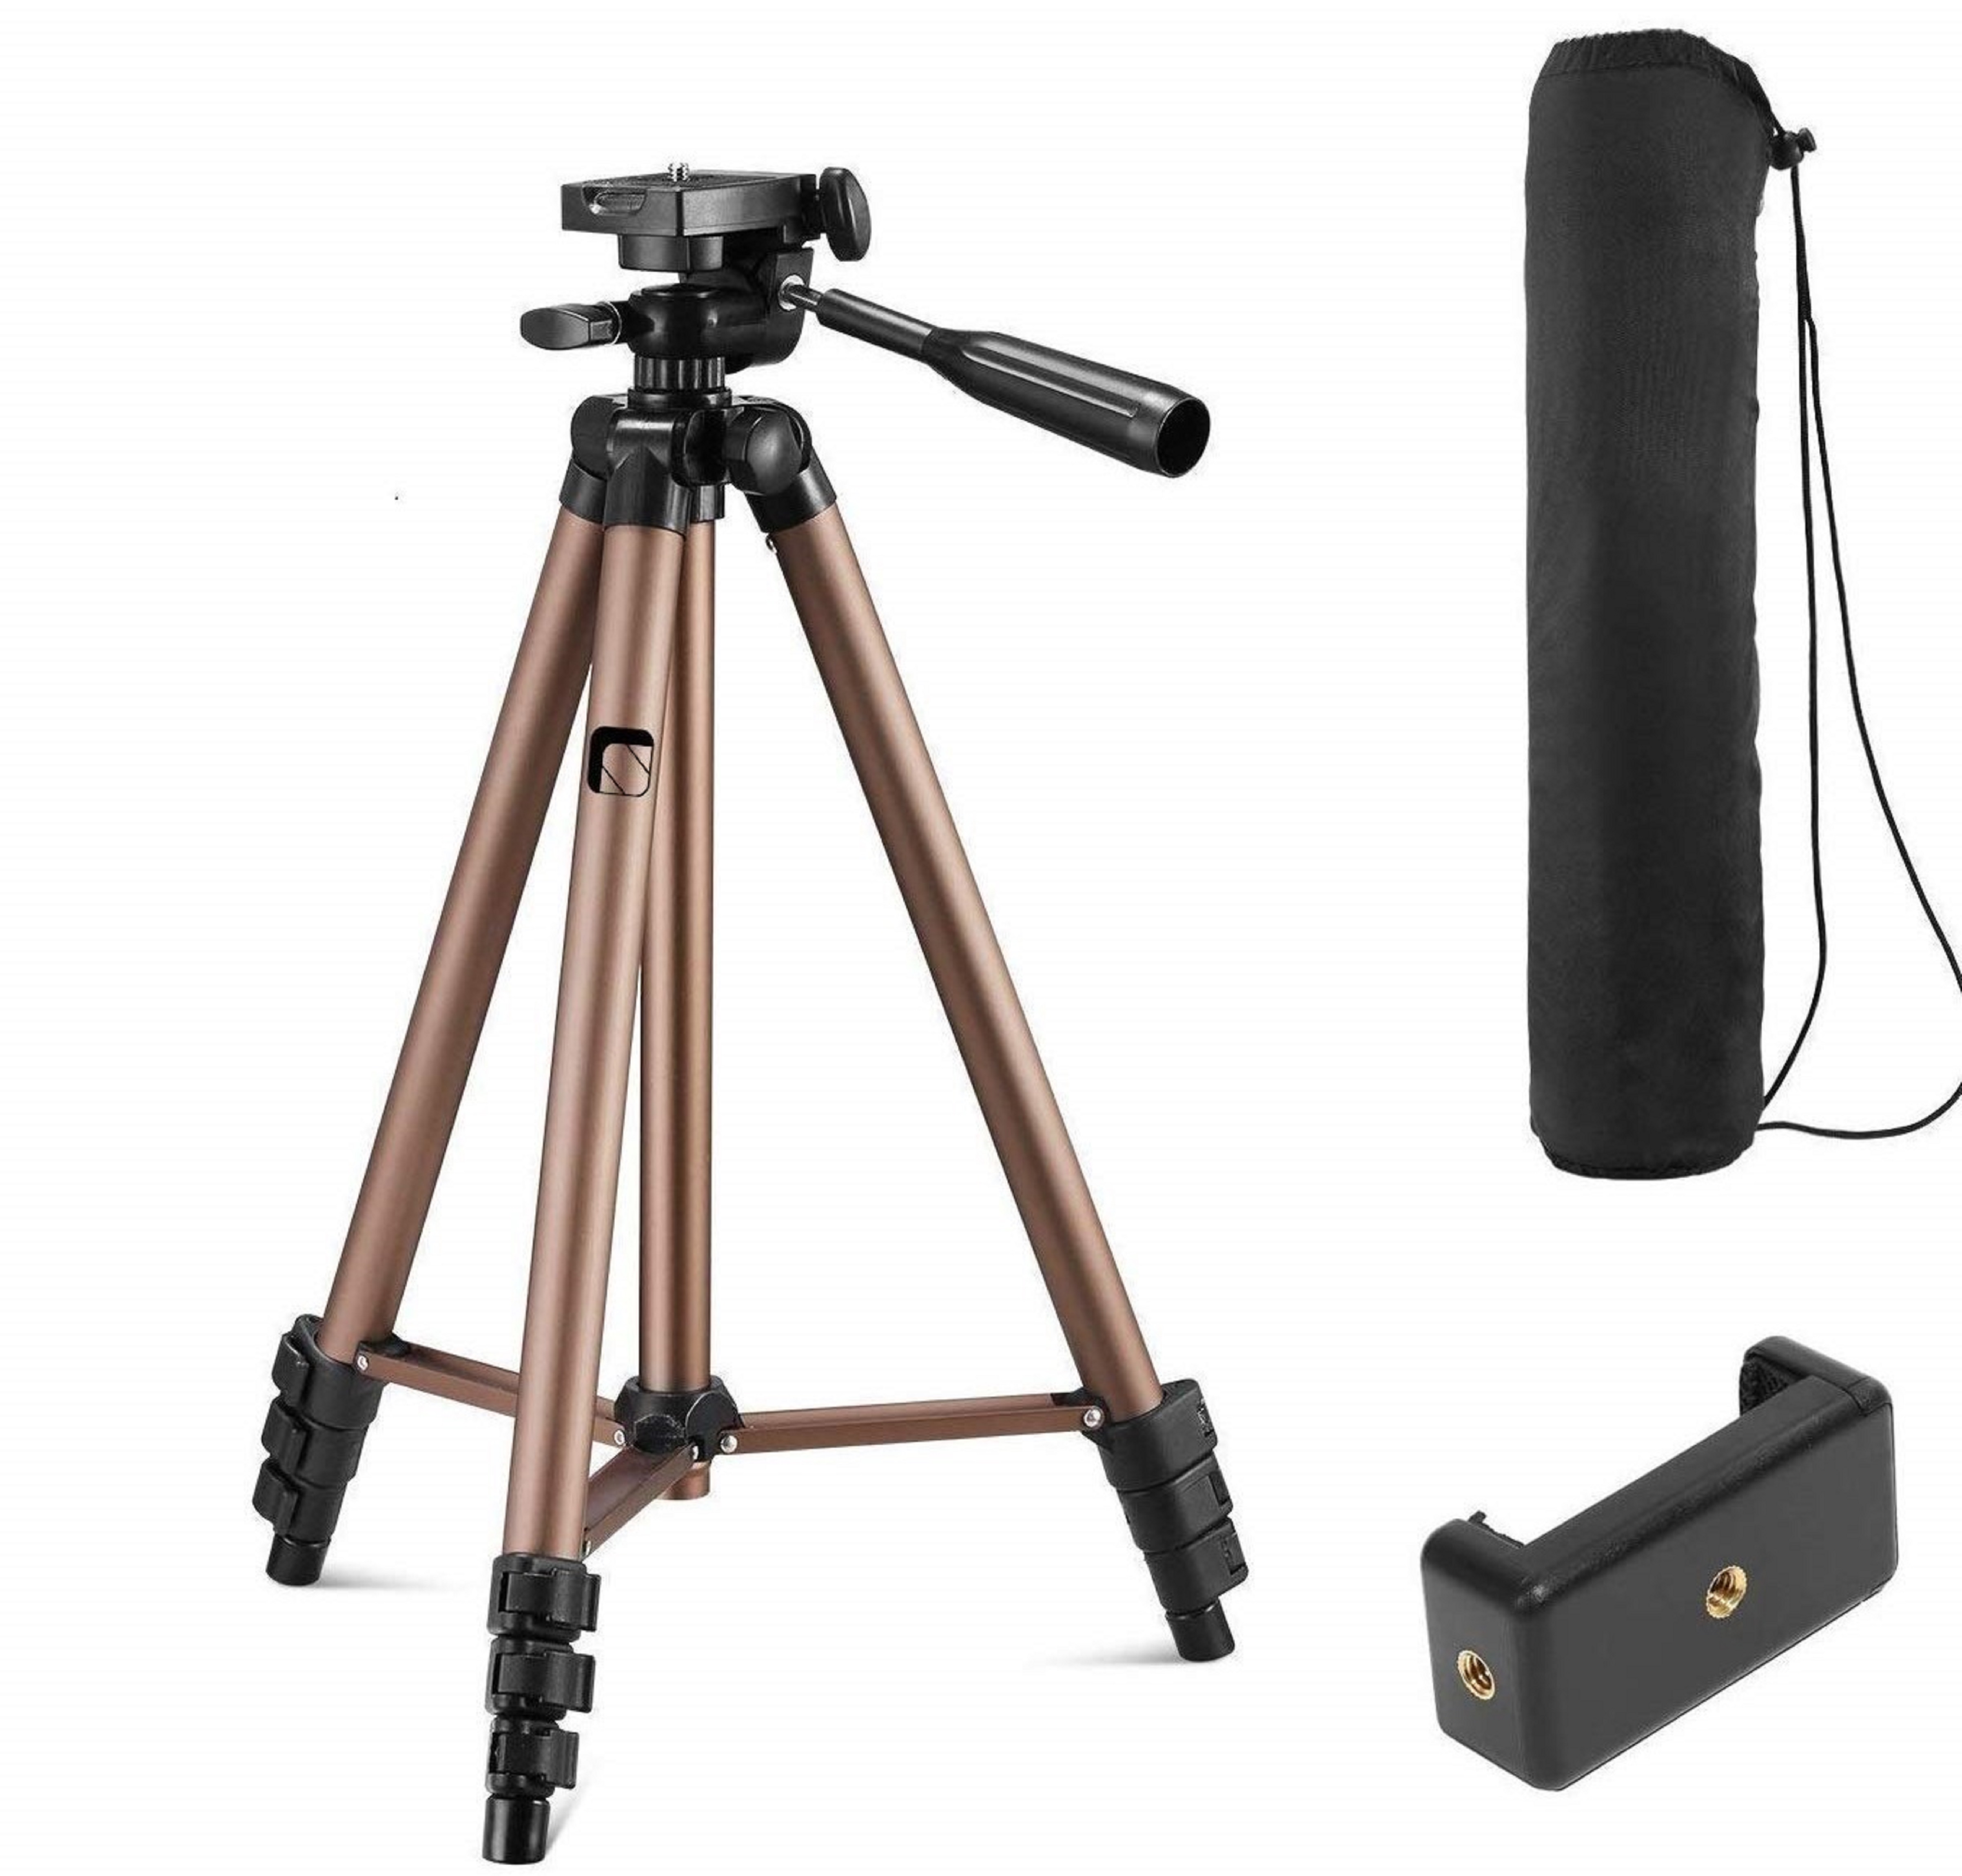 11 Best Mobile Stands For Video Recording In India- For Best Recording Experience